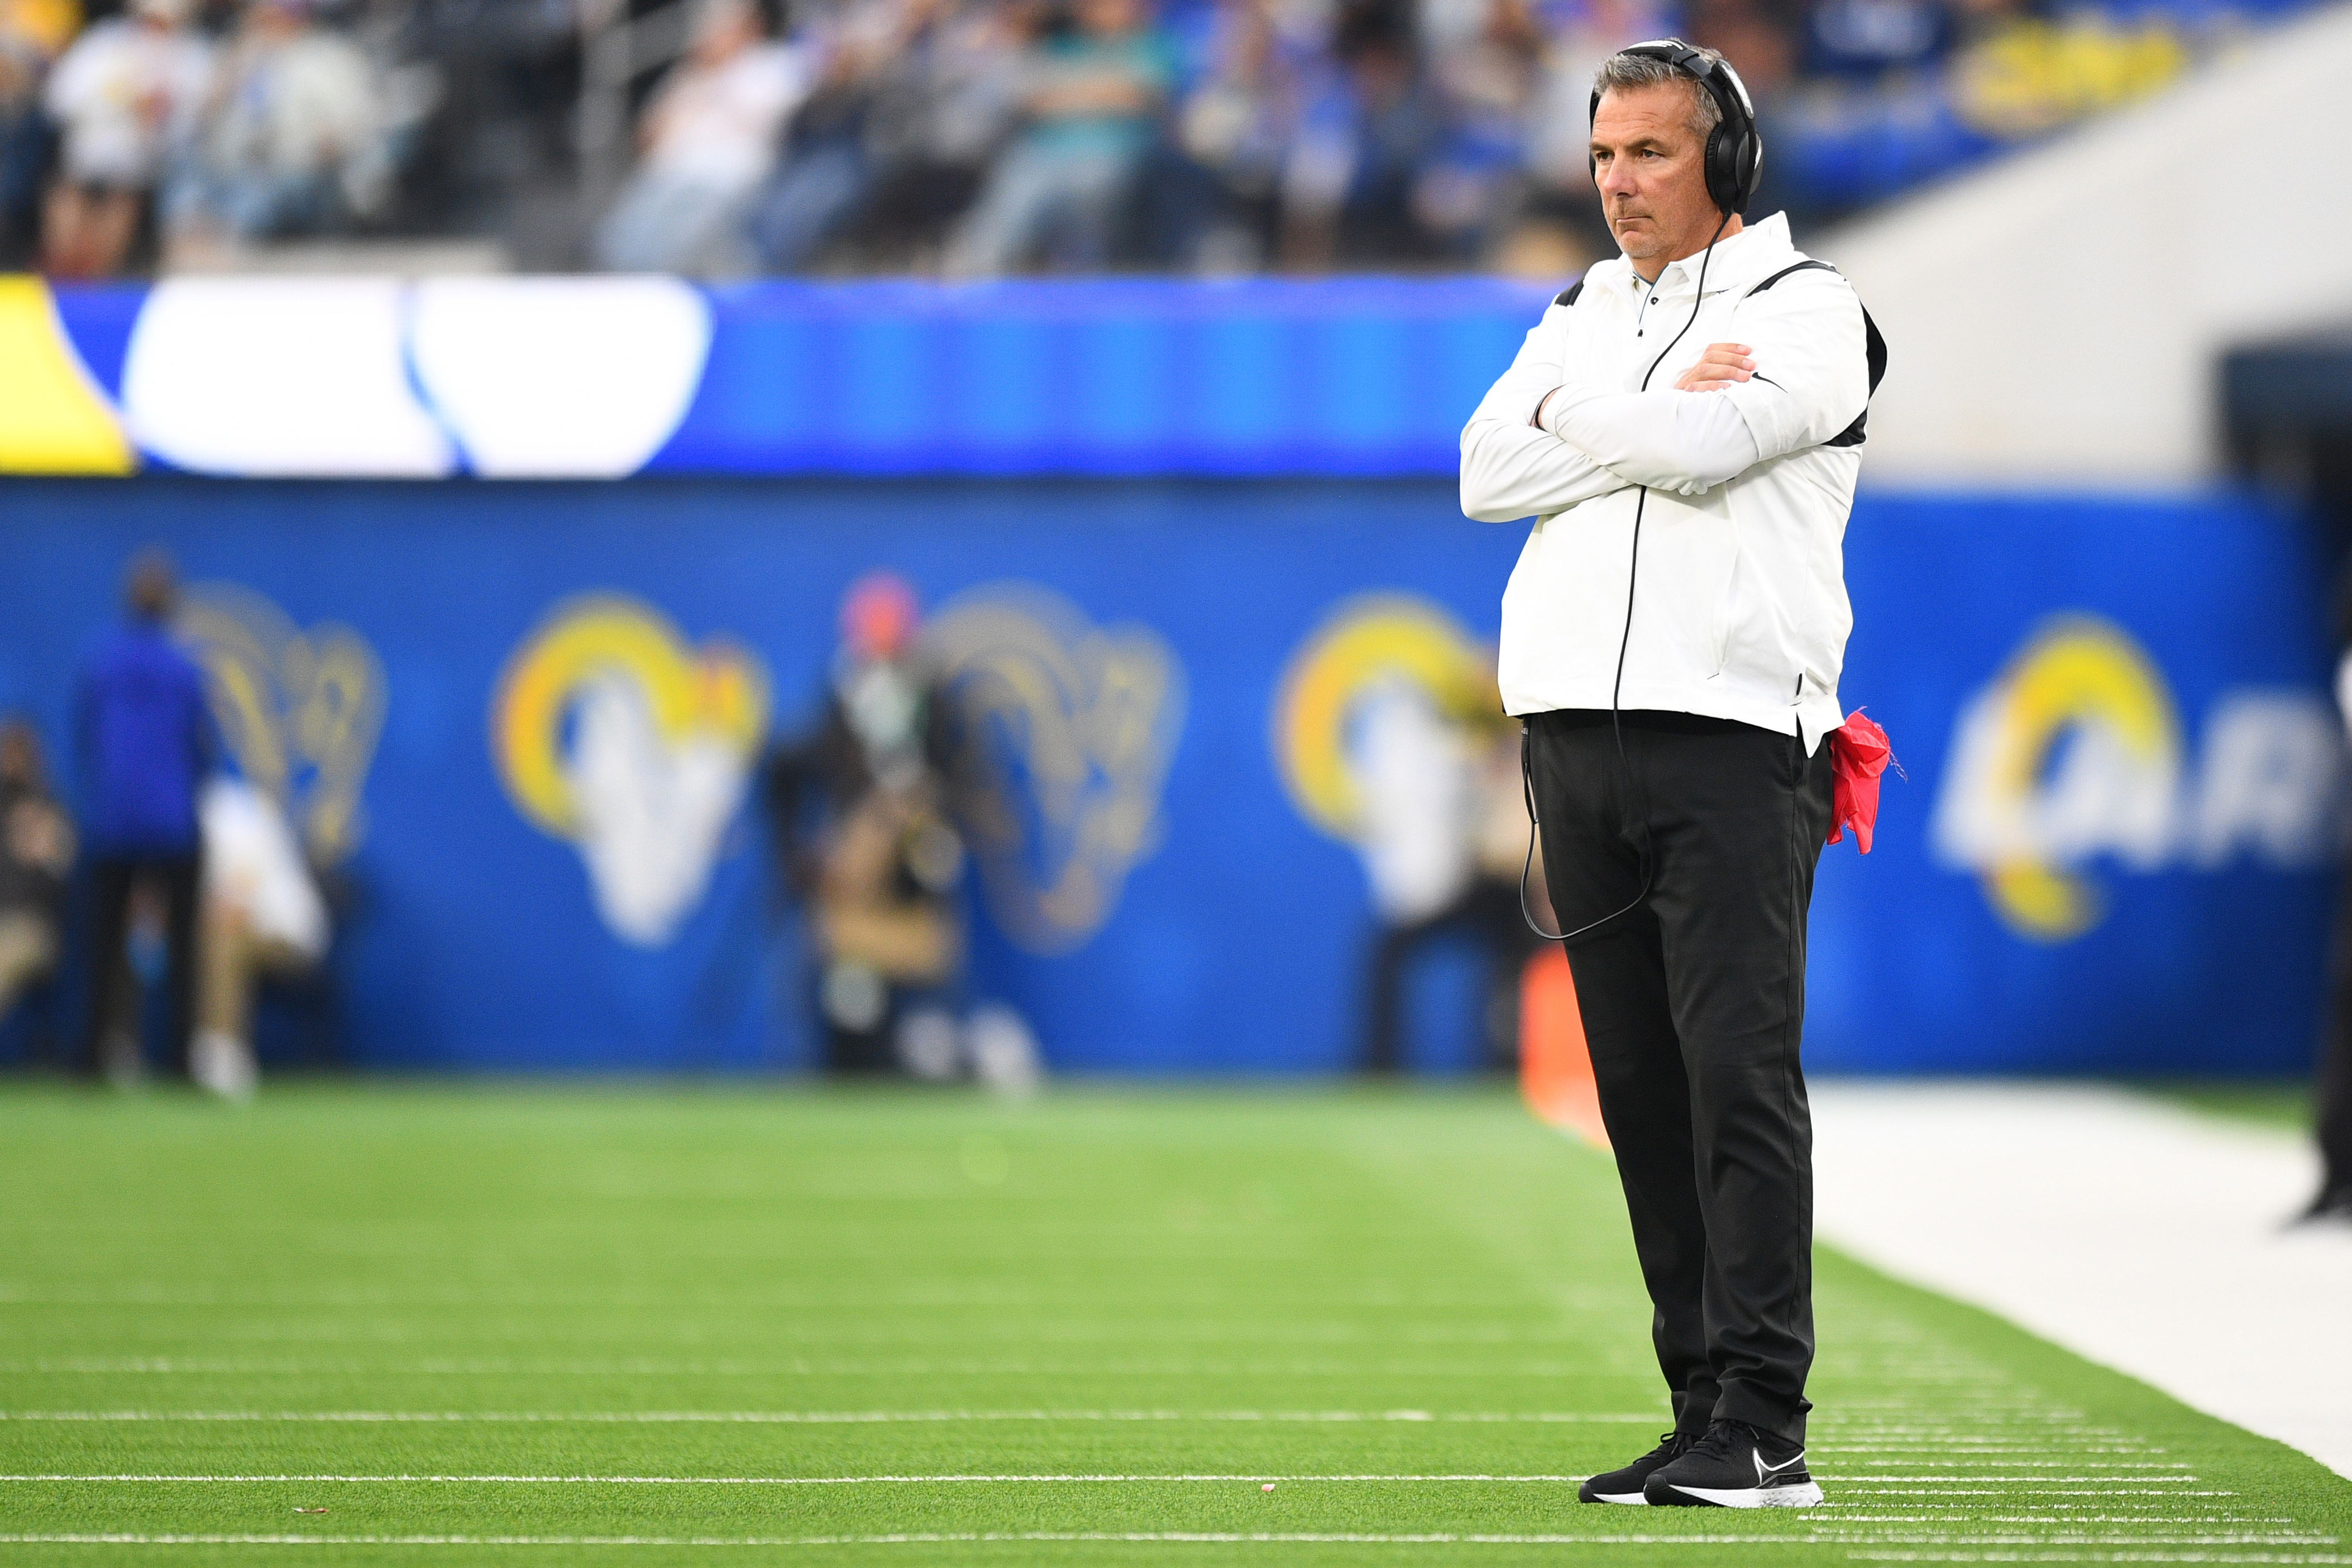 Jaguars HC Urban Meyer is back with more comments.